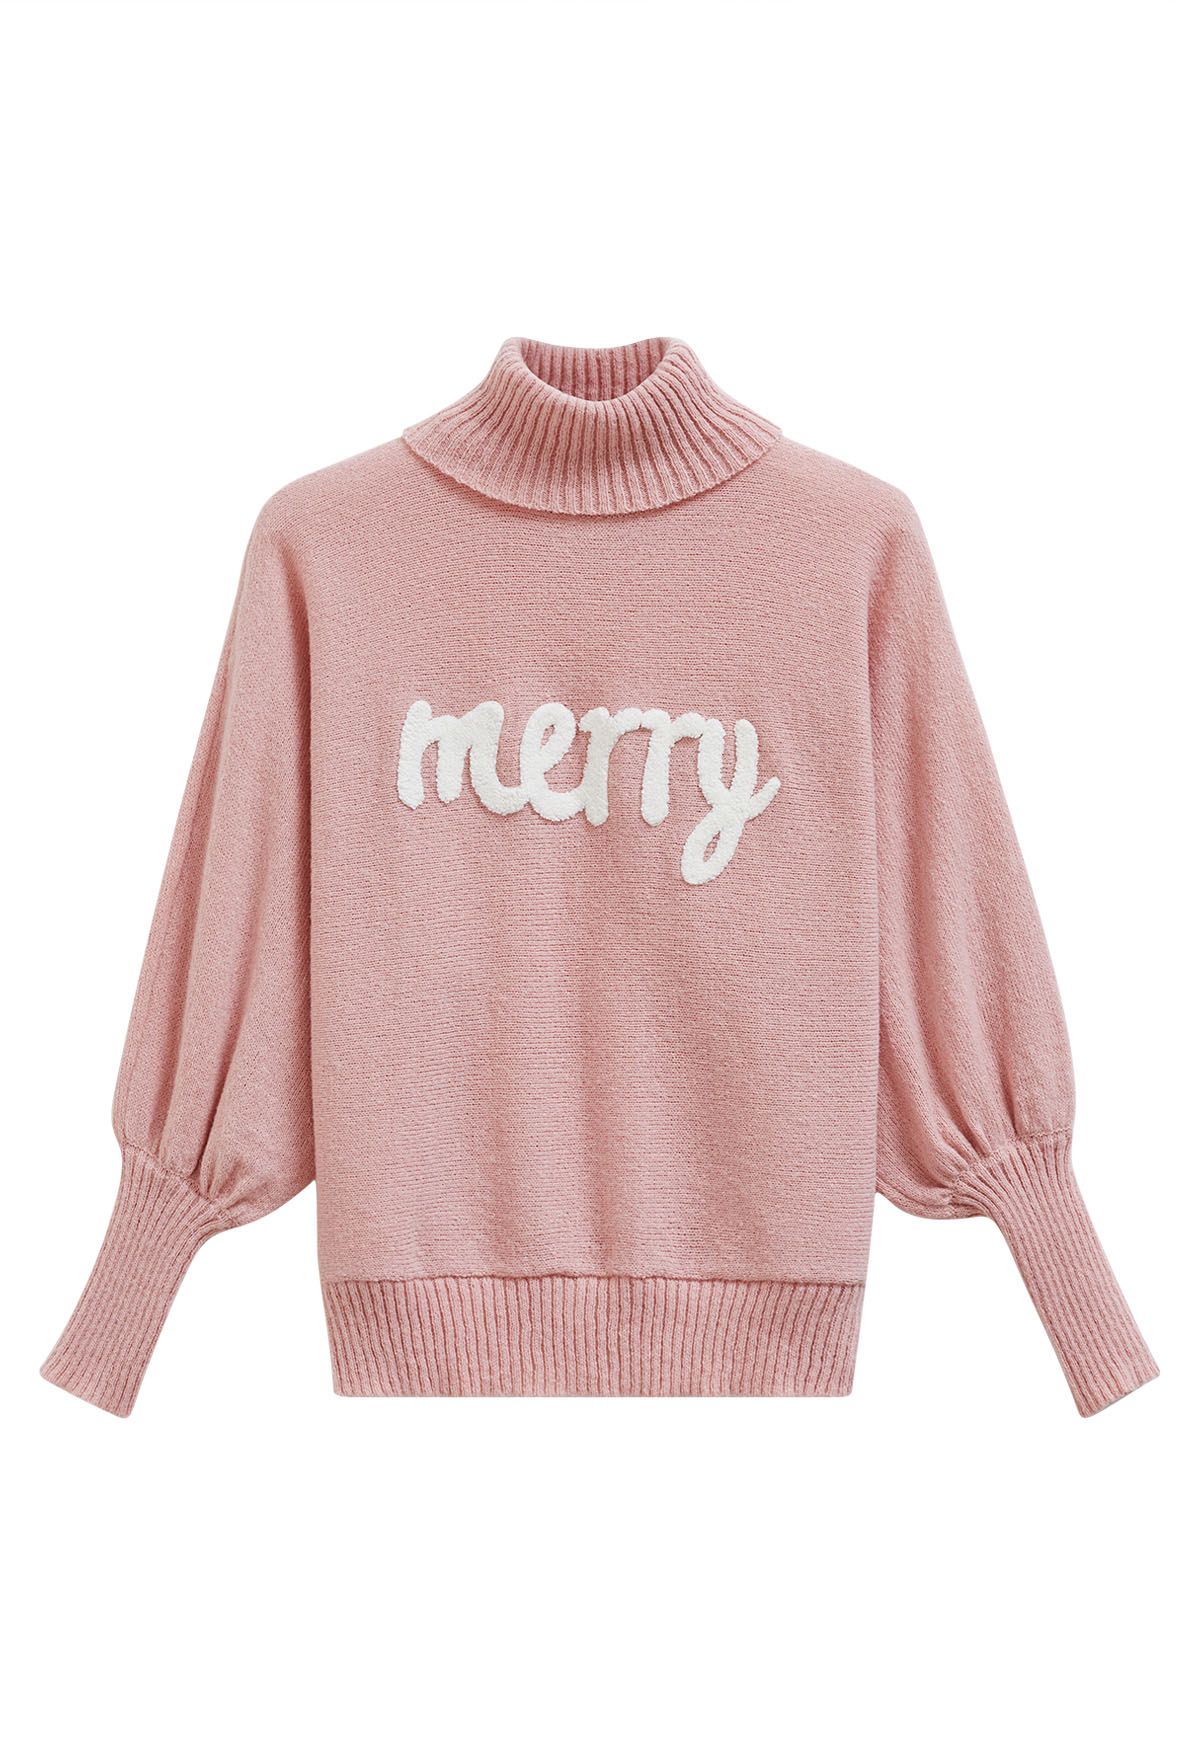 Merry Turtleneck Batwing Sleeve Knit Sweater in Pink